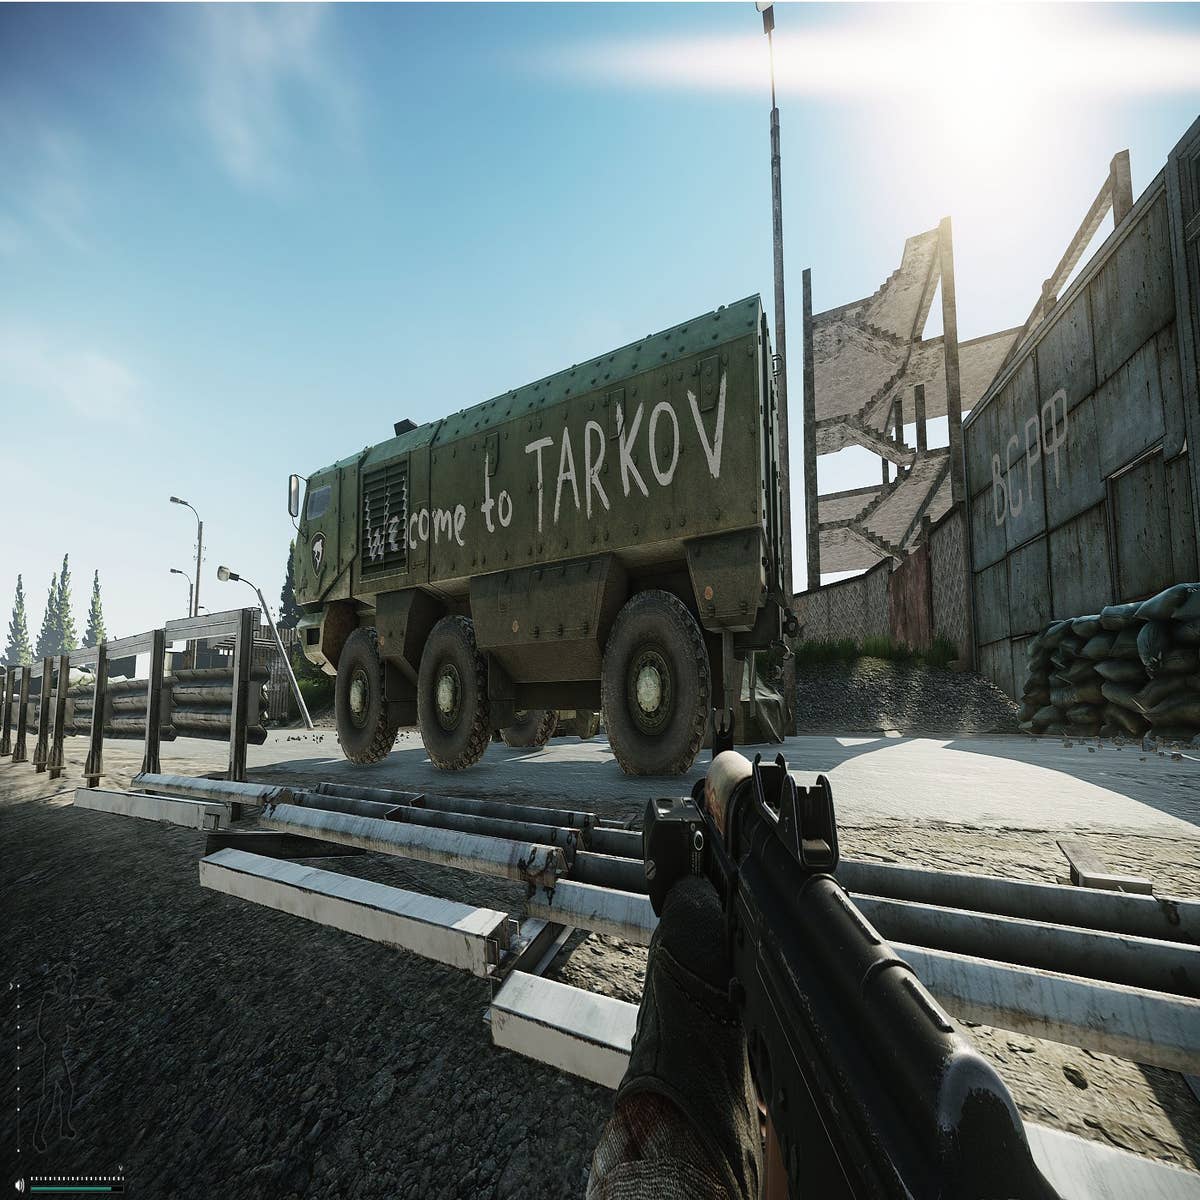 Escape From Tarkov: Top Ten Weapons Ranked